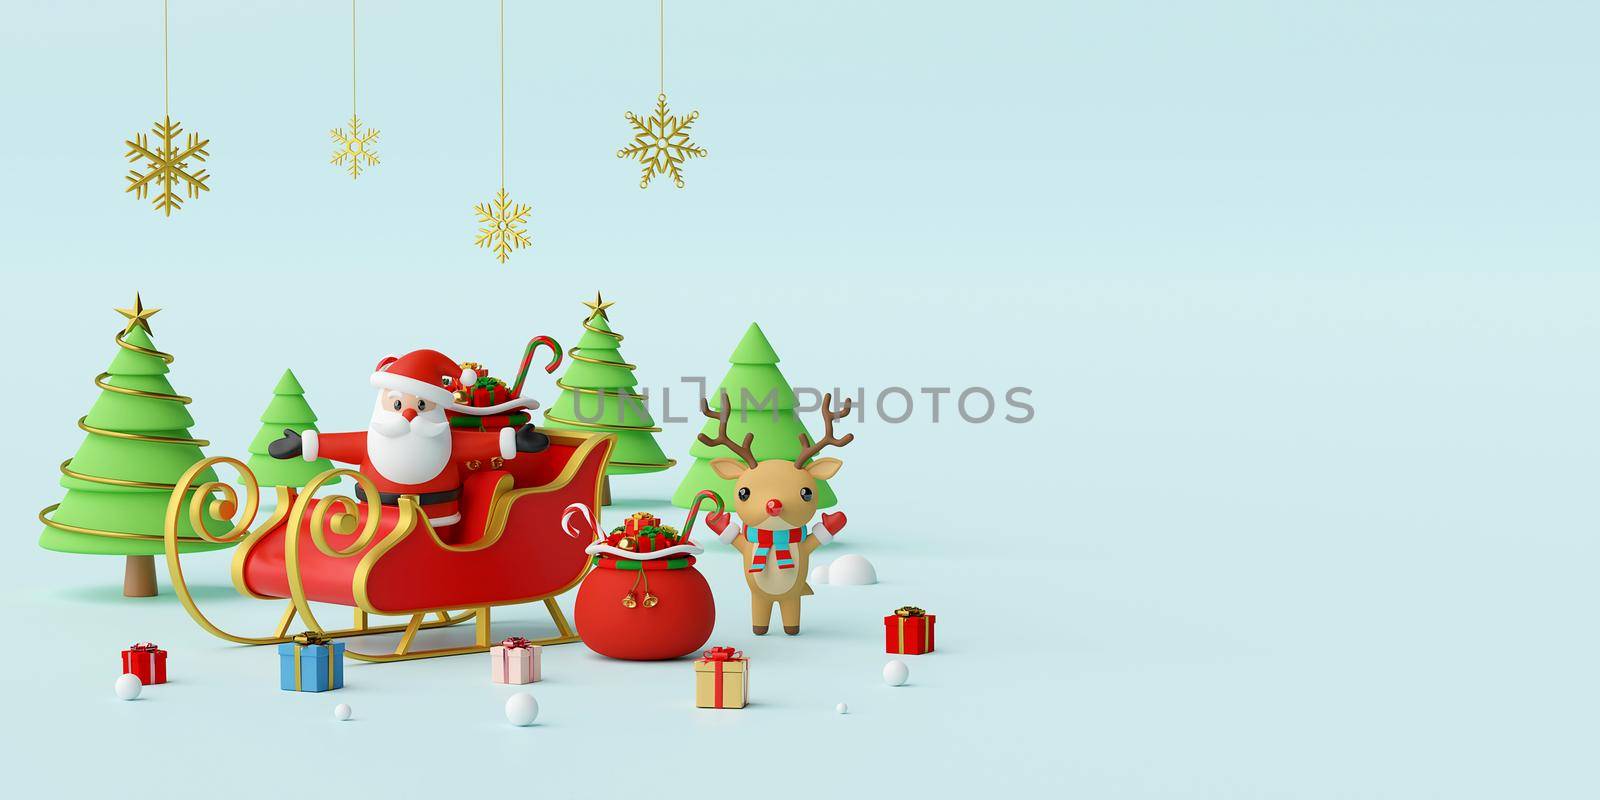 Merry Christmas and Happy New Year, Web banner of Santa Claus on a Sleigh with reindeer and Christmas gifts, 3d rendering by nutzchotwarut